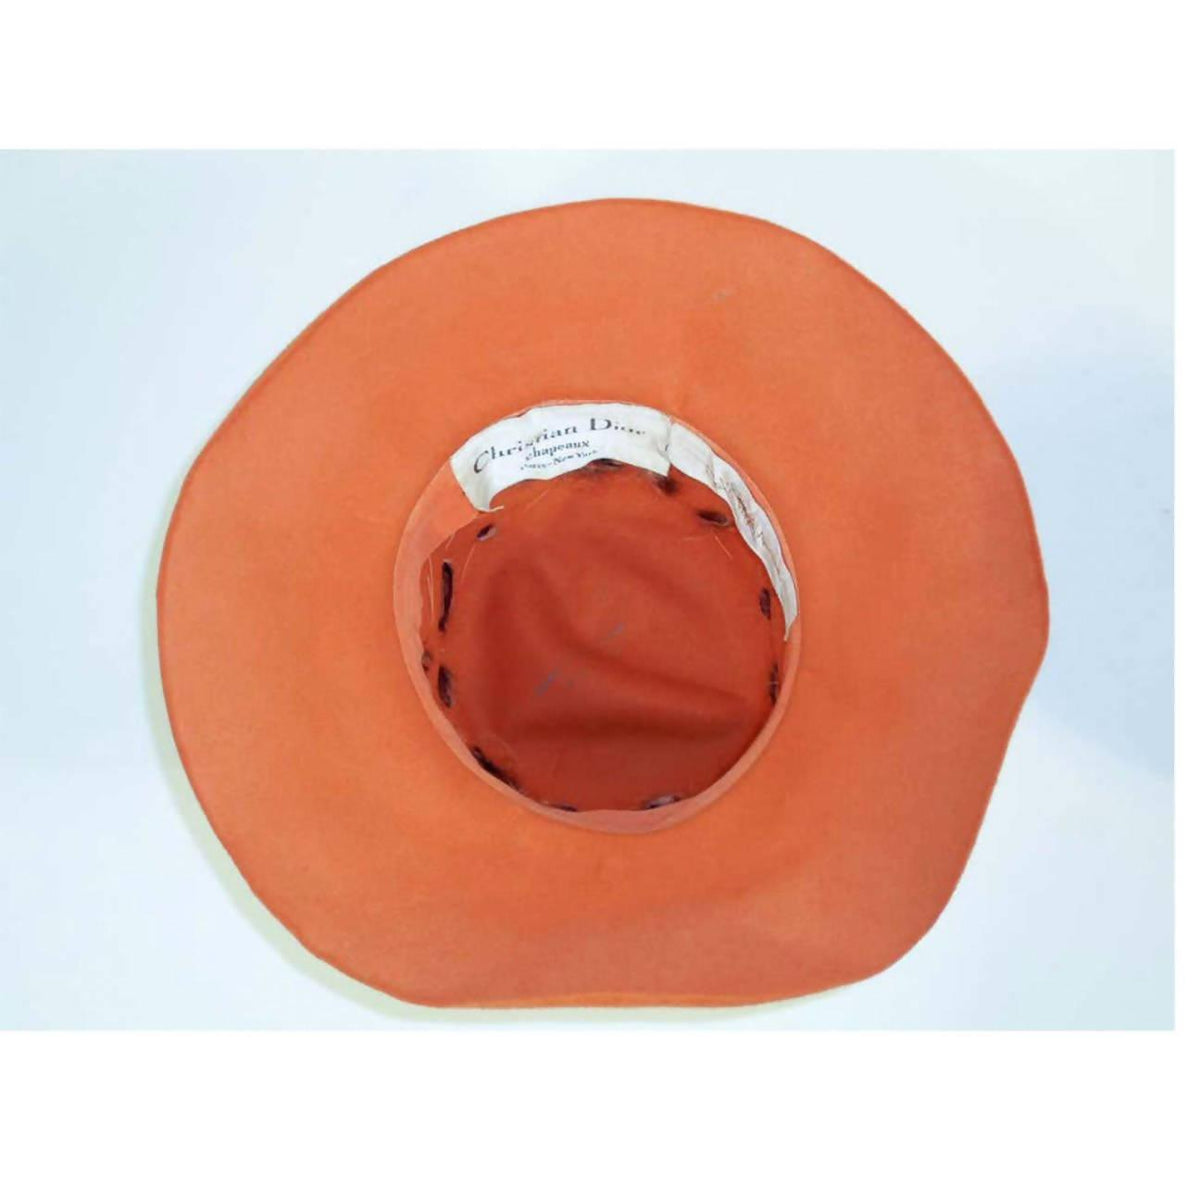 Pre-Owned CHRISTIAN DIOR Chapeaux Orange Floppy Hat - theREMODA